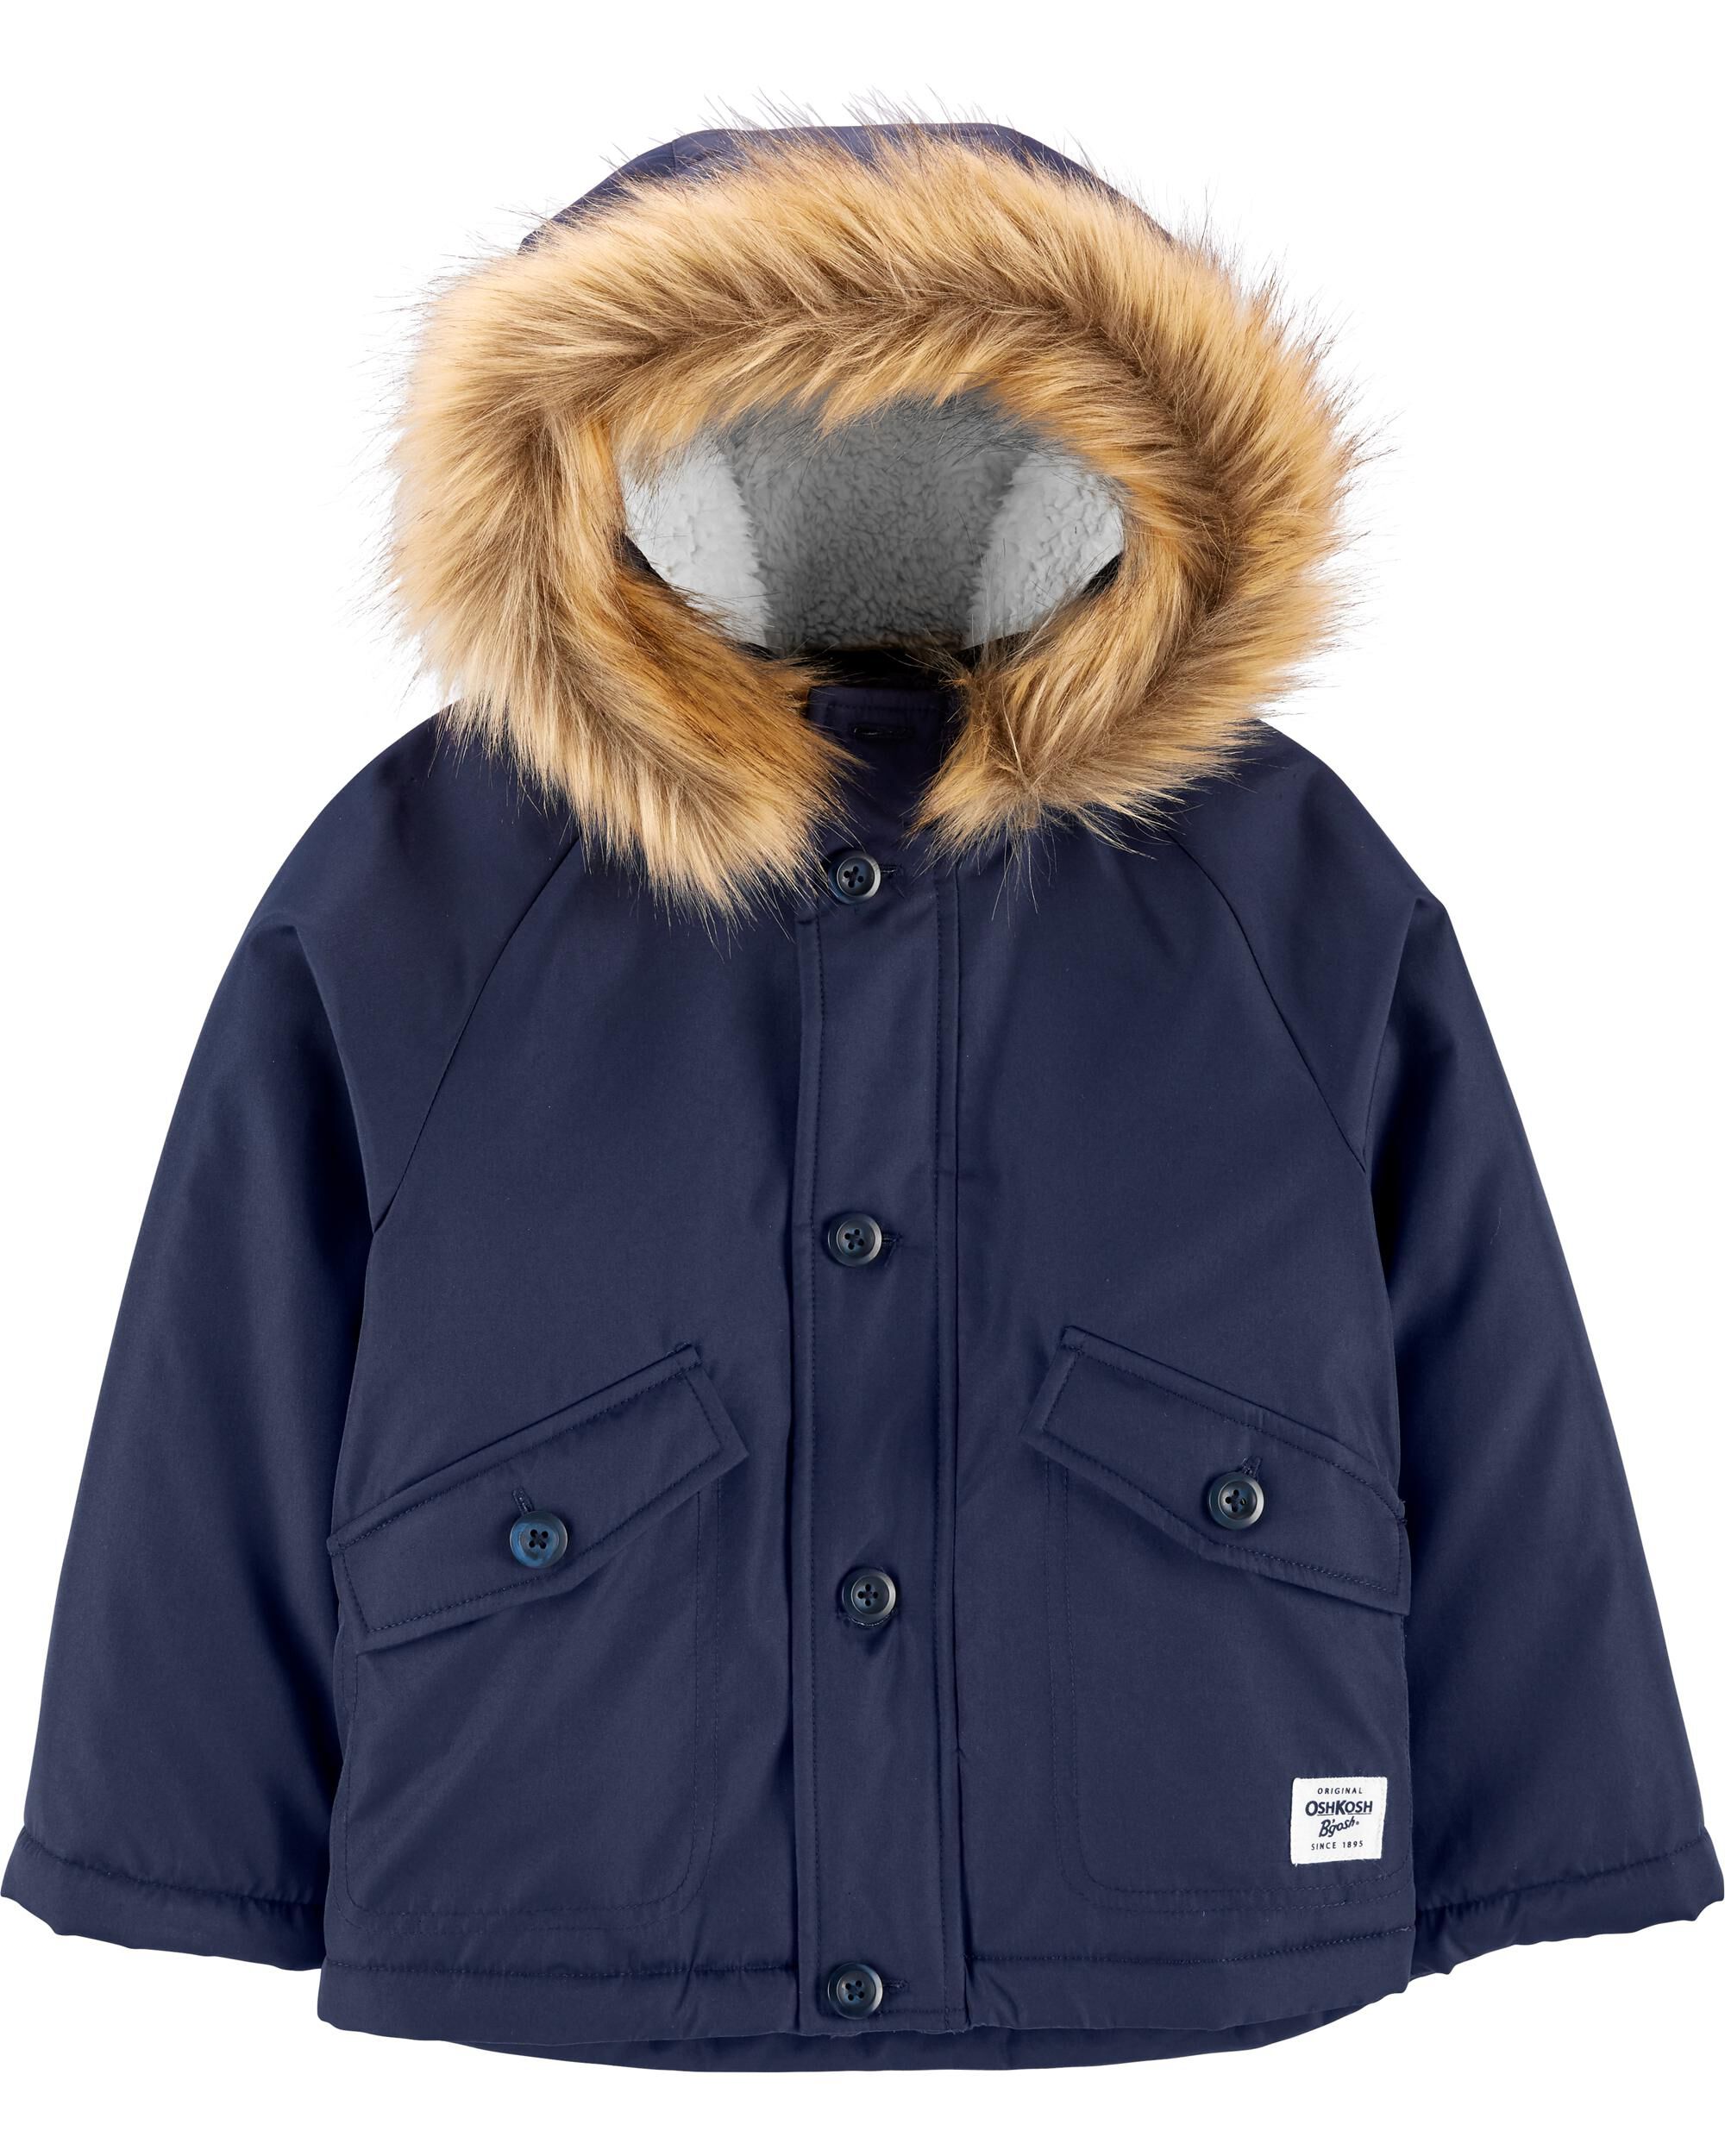 carter's jackets for toddlers